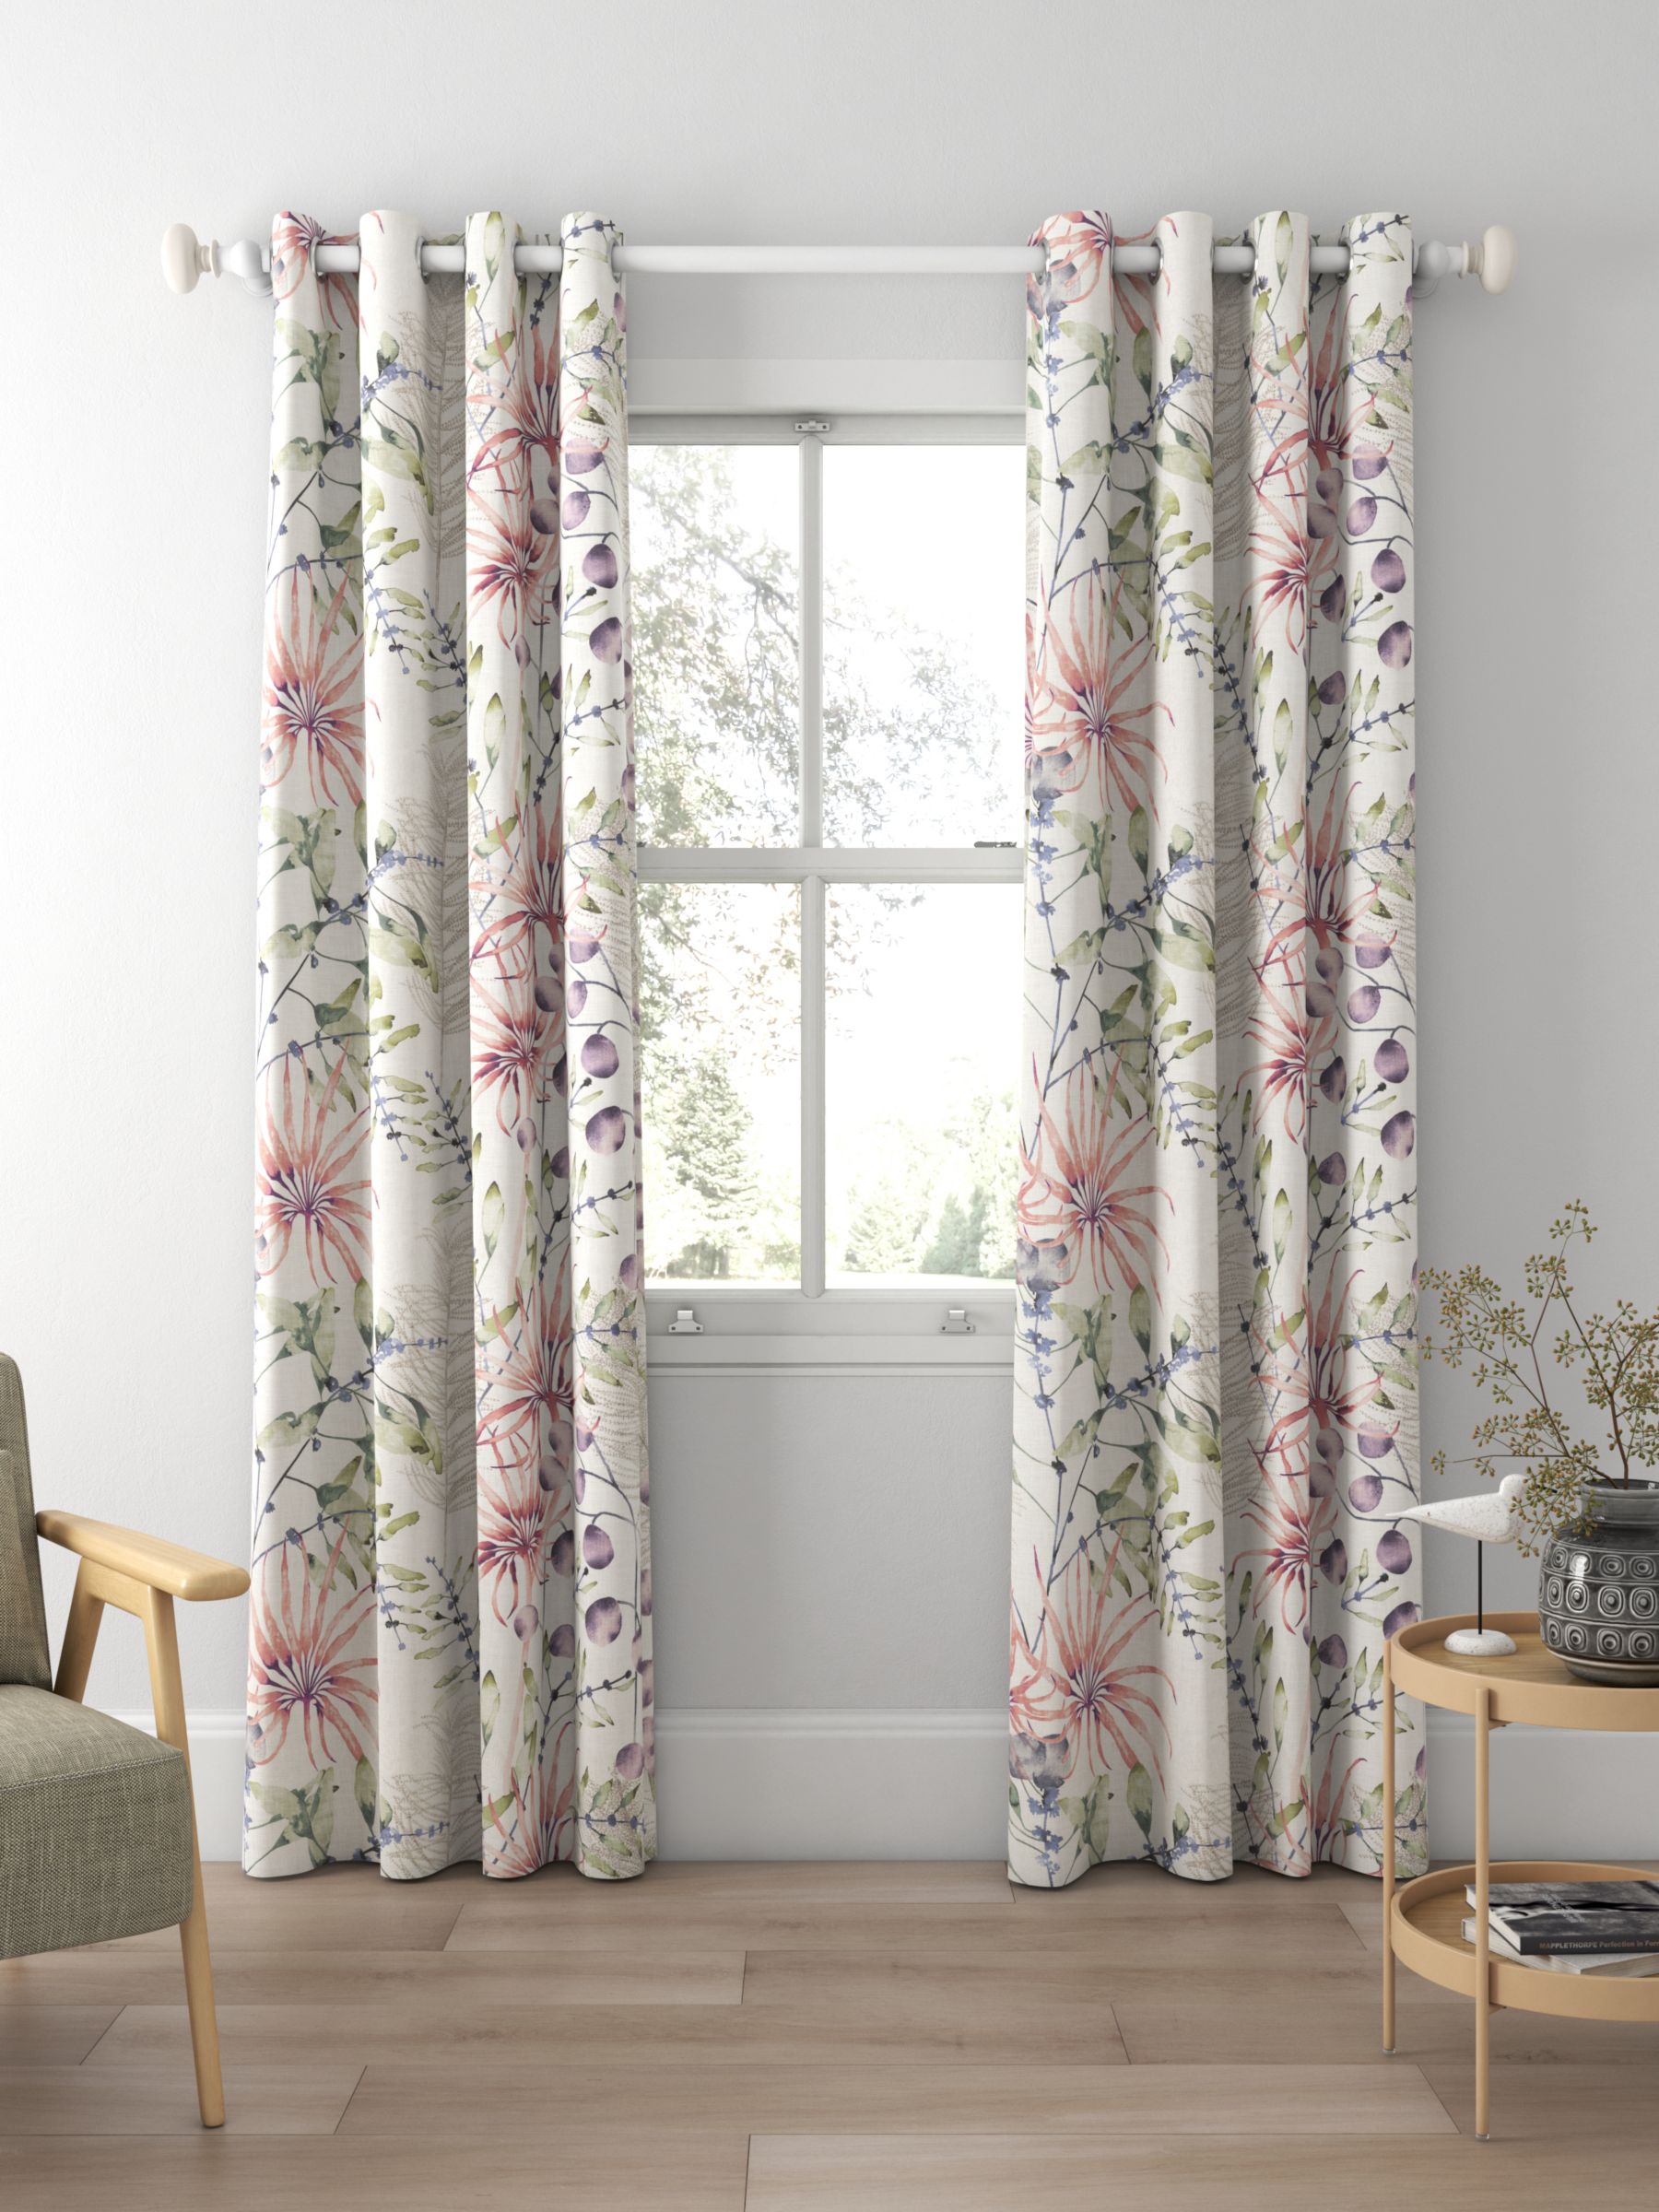 Harlequin Postelia Made to Measure Curtains, Berry/Heather